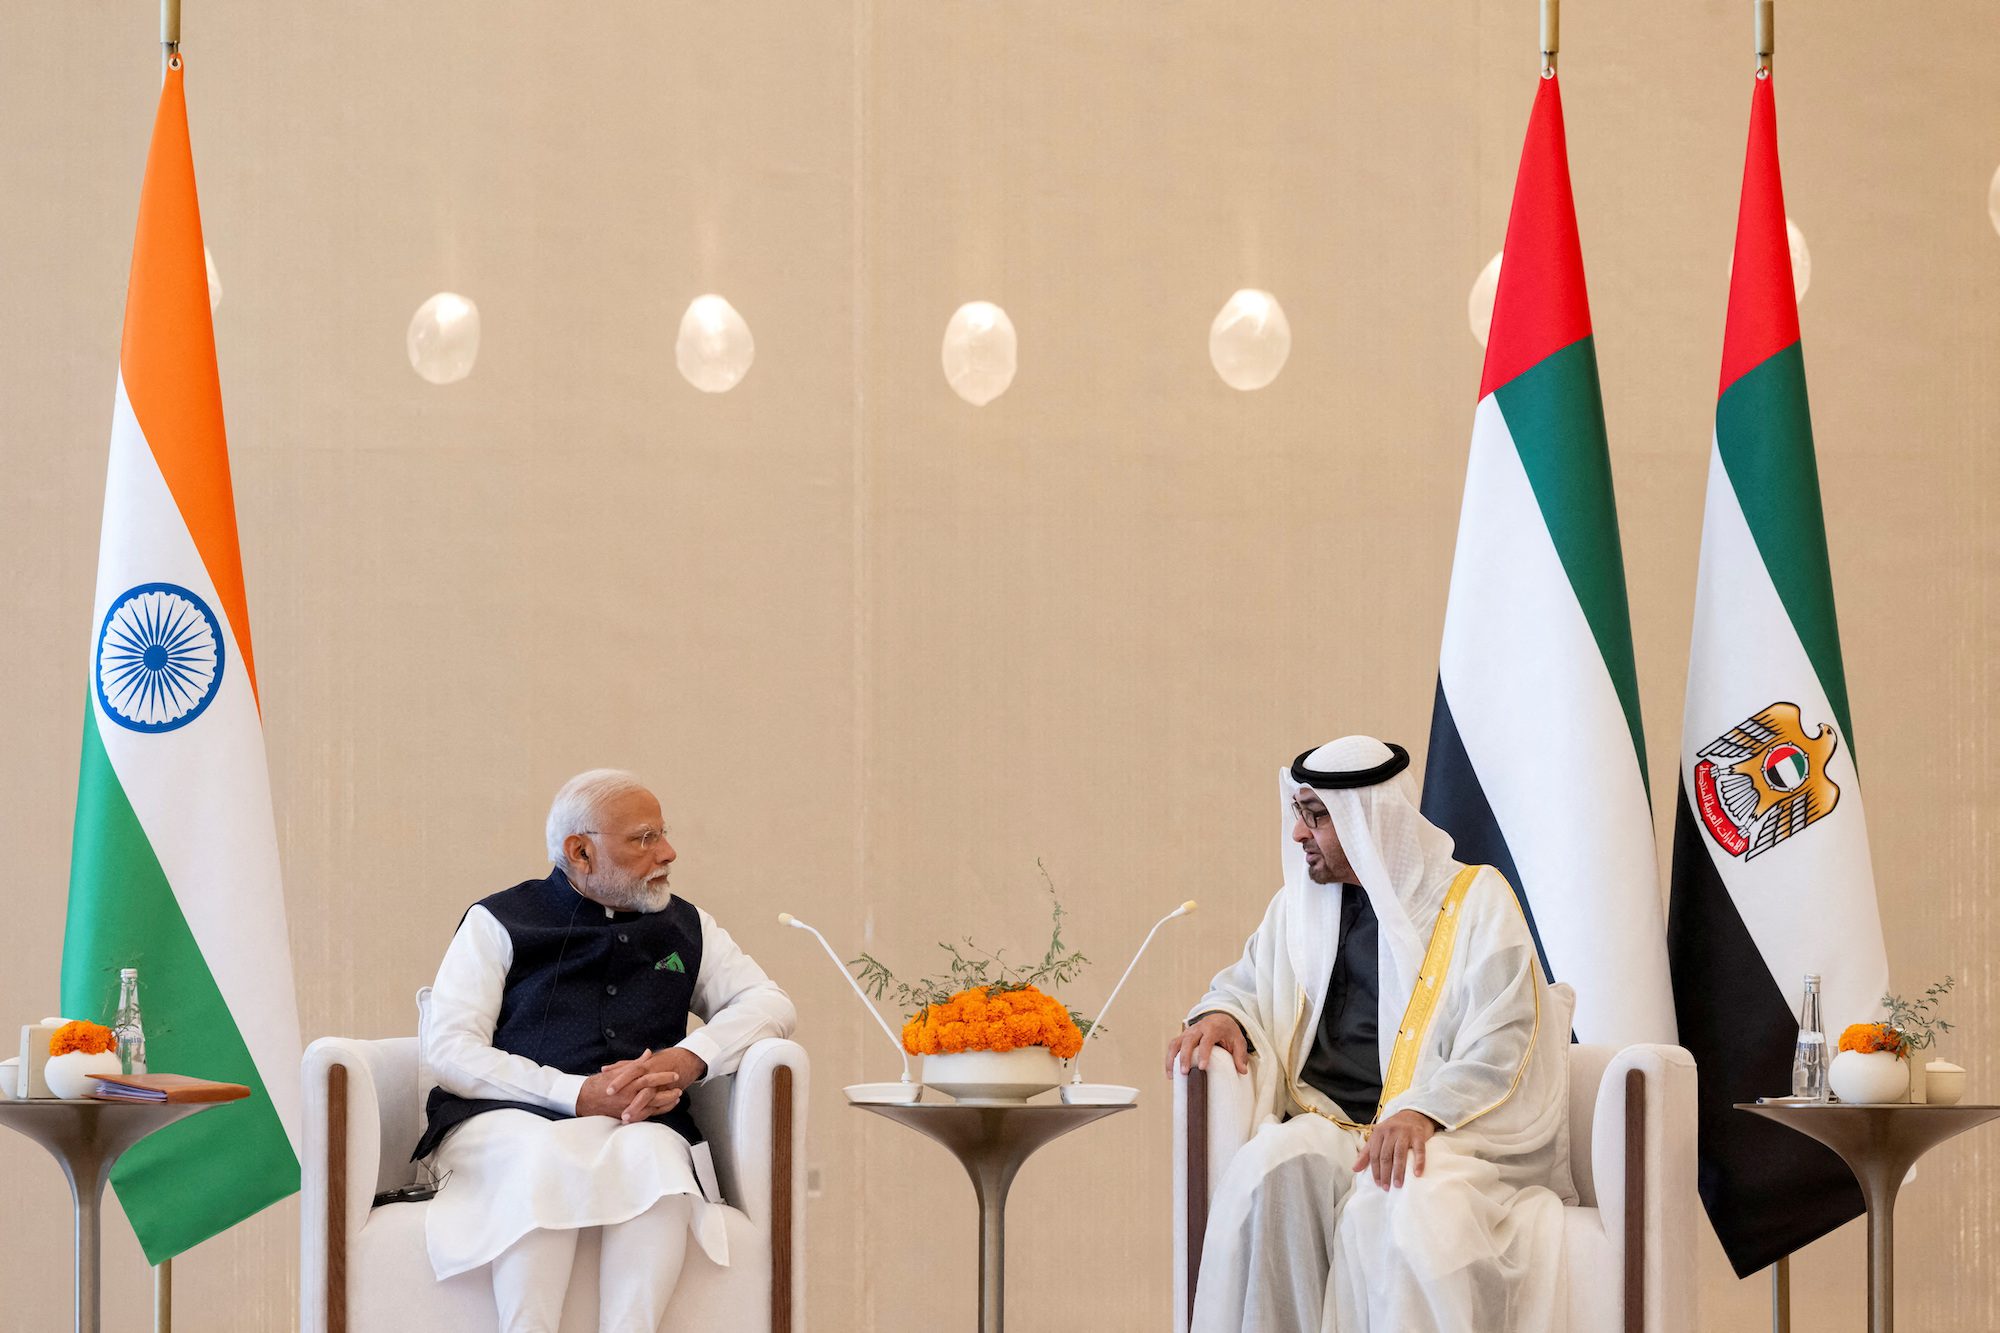 Sheikh Mohamed bin Zayed Al Nahyan, President of the United Arab Emirates, meets with Narendra Modi, Prime Minister of India, during a reception at the Presidential Airport in Abu Dhabi, United Arab Emirates, February 13, 2024. Mohamed Al Hammadi/UAE Presidential Court/Handout via REUTERS